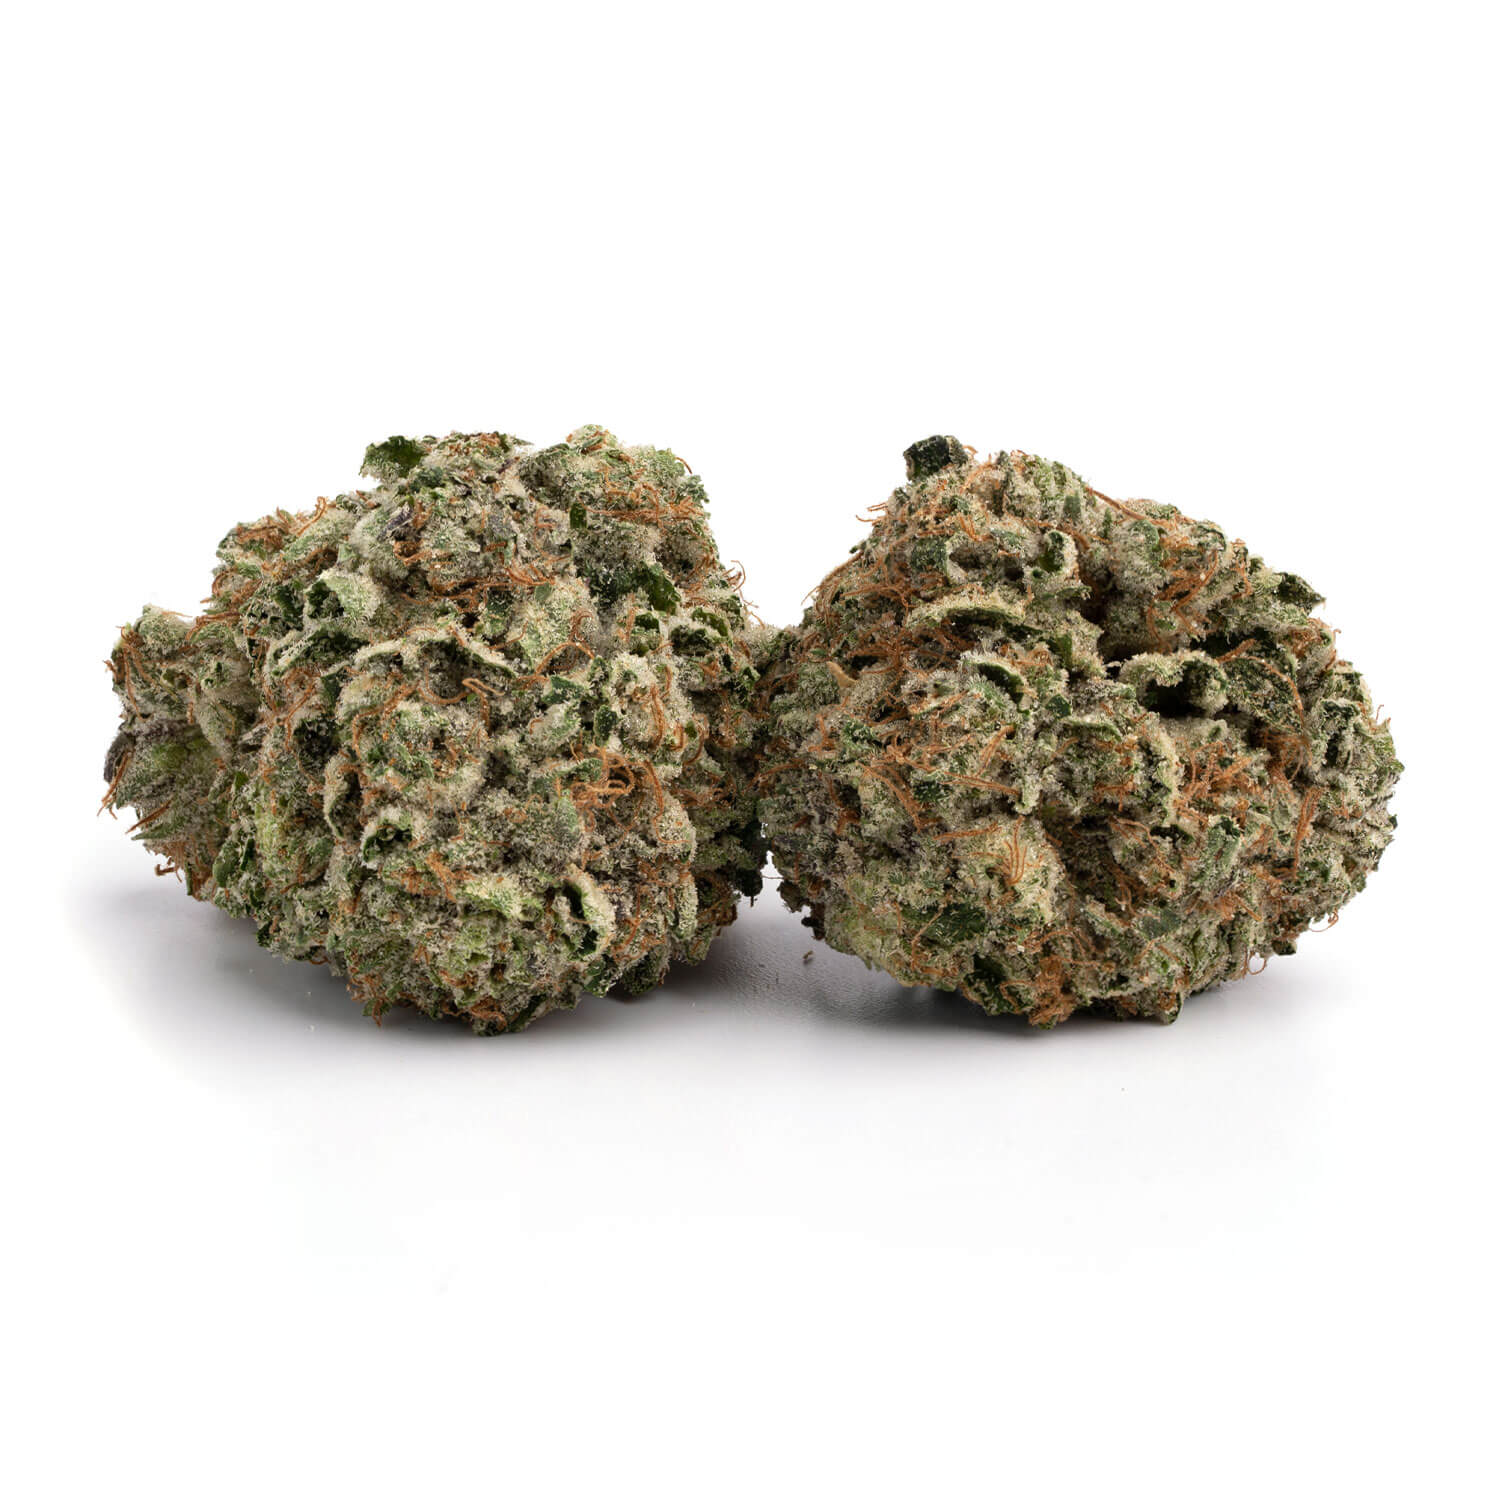 Tom Ford Pink Kush - Cannabismo | Buy Weed Online Canada Dispensary